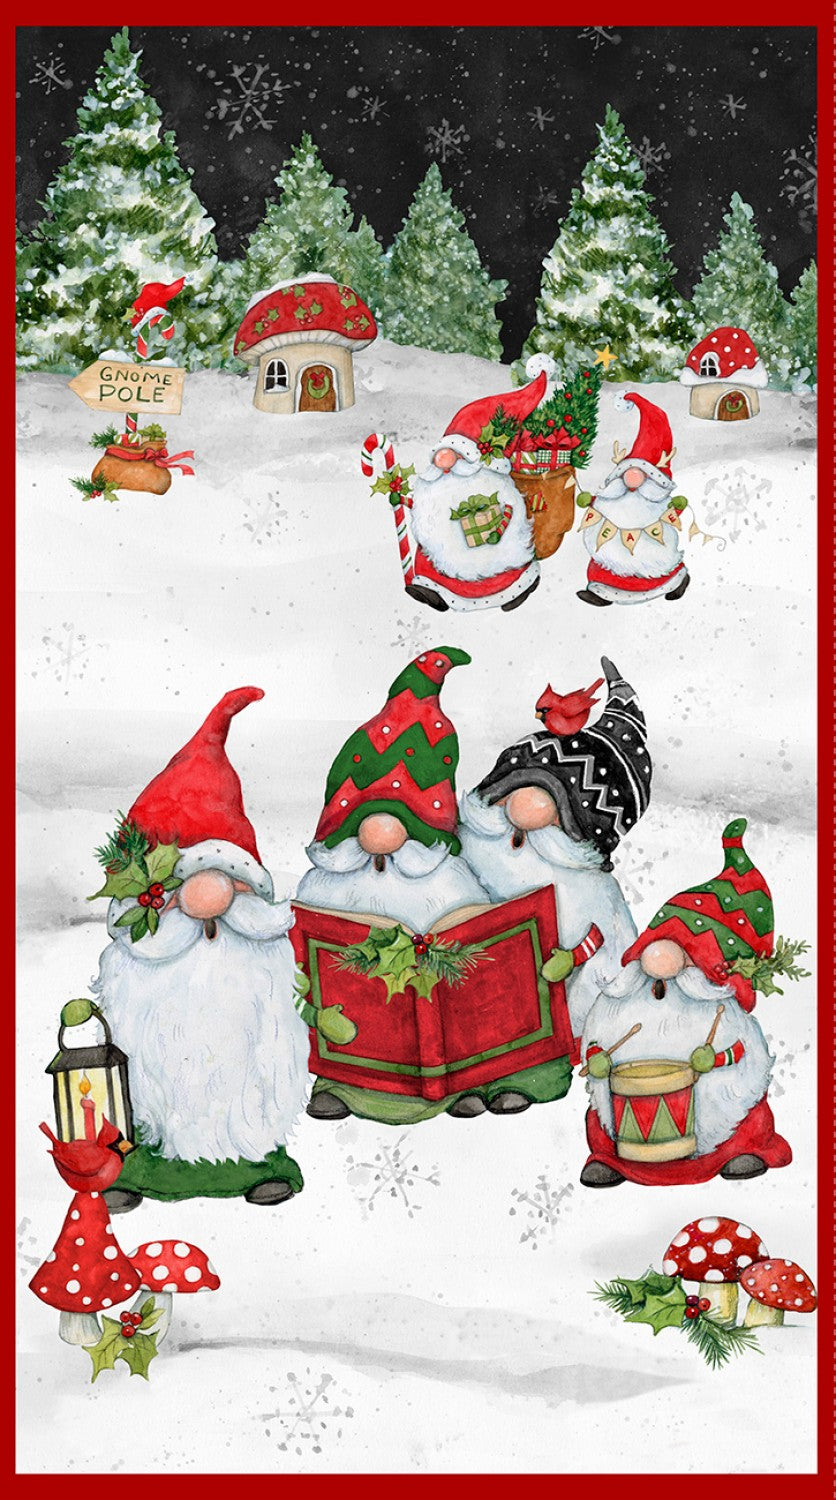 Lewis & Irene - Christmas Tree - Cotton Quilting Fabric by the yard -  Christmas Fabric - Santa Claus